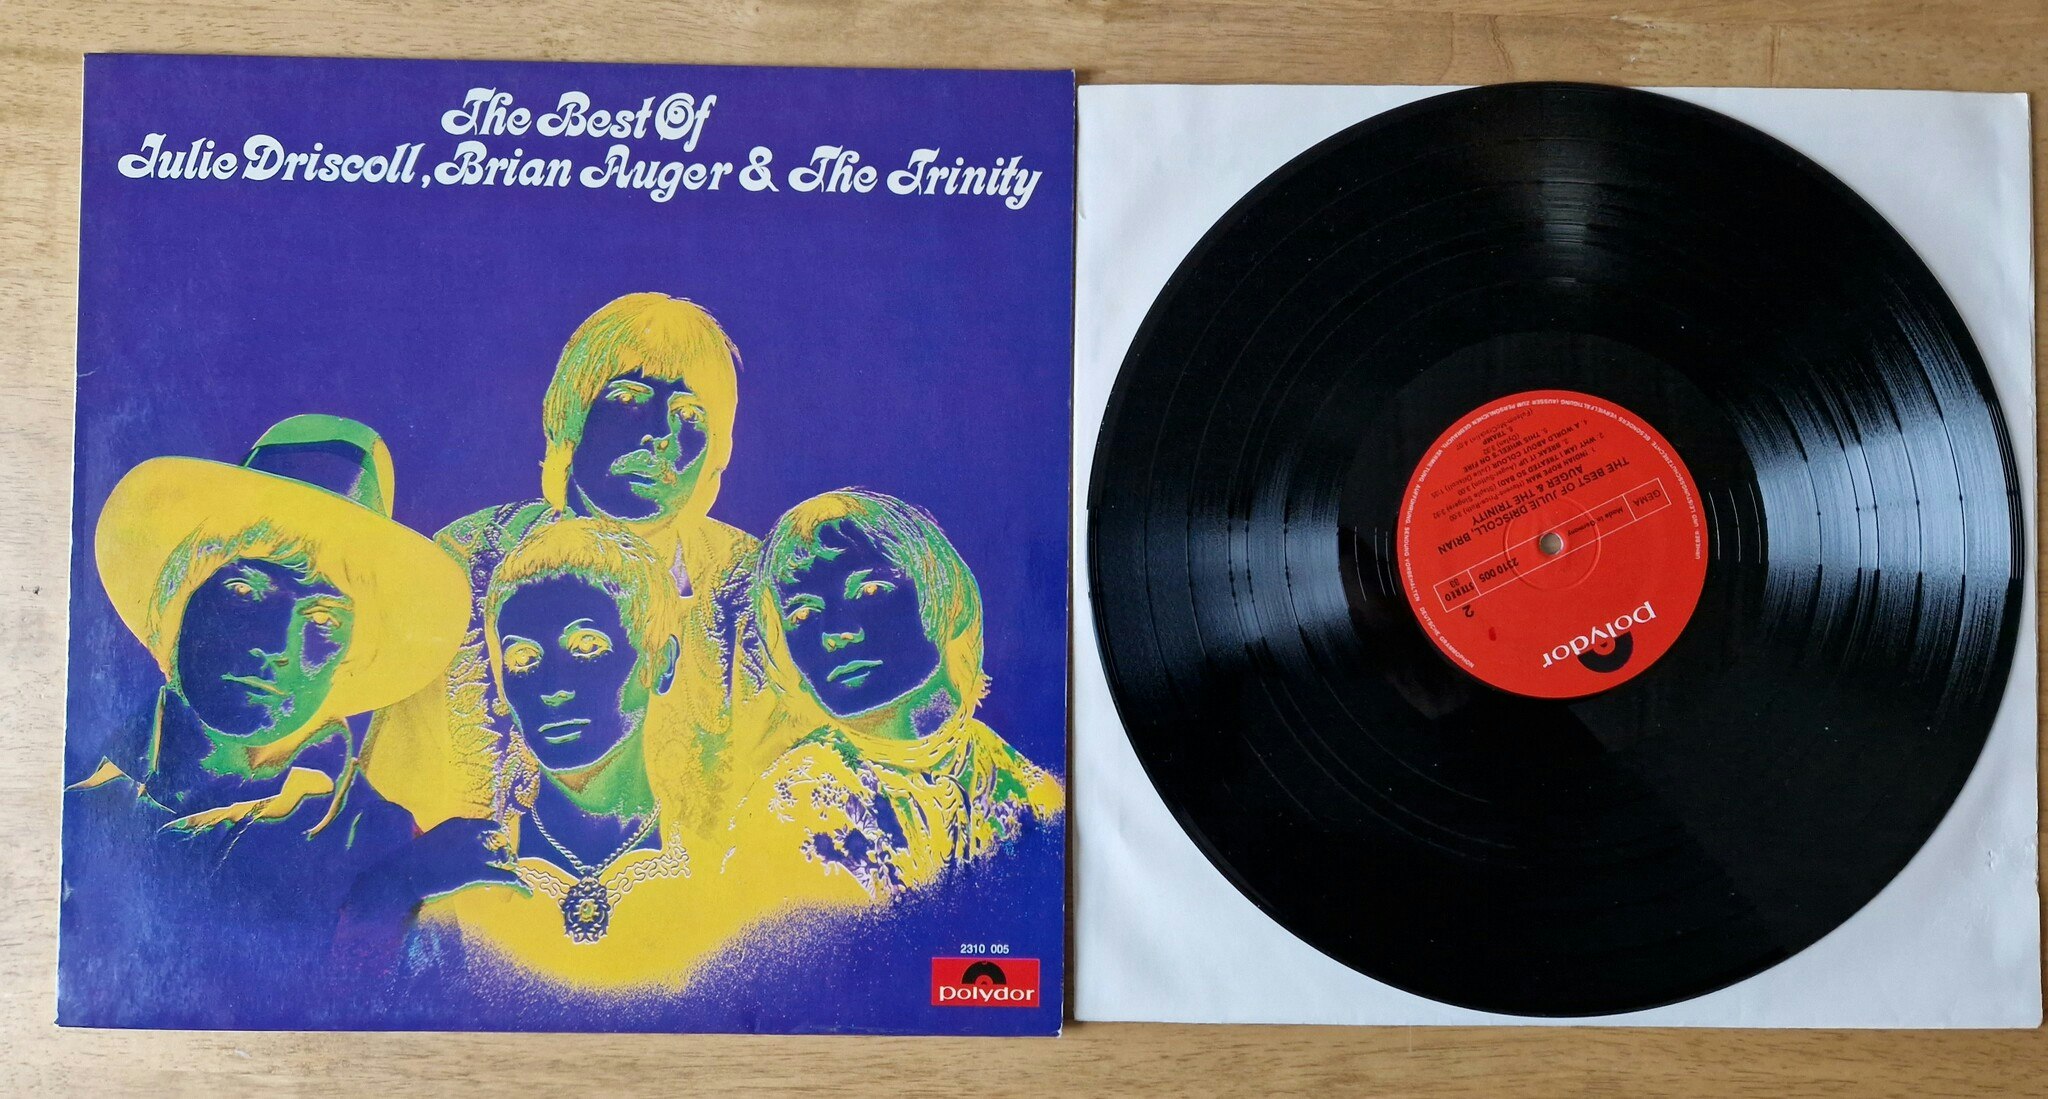 Julie Driscoll, Brian Auger & The Trinity, The Best of. Vinyl LP